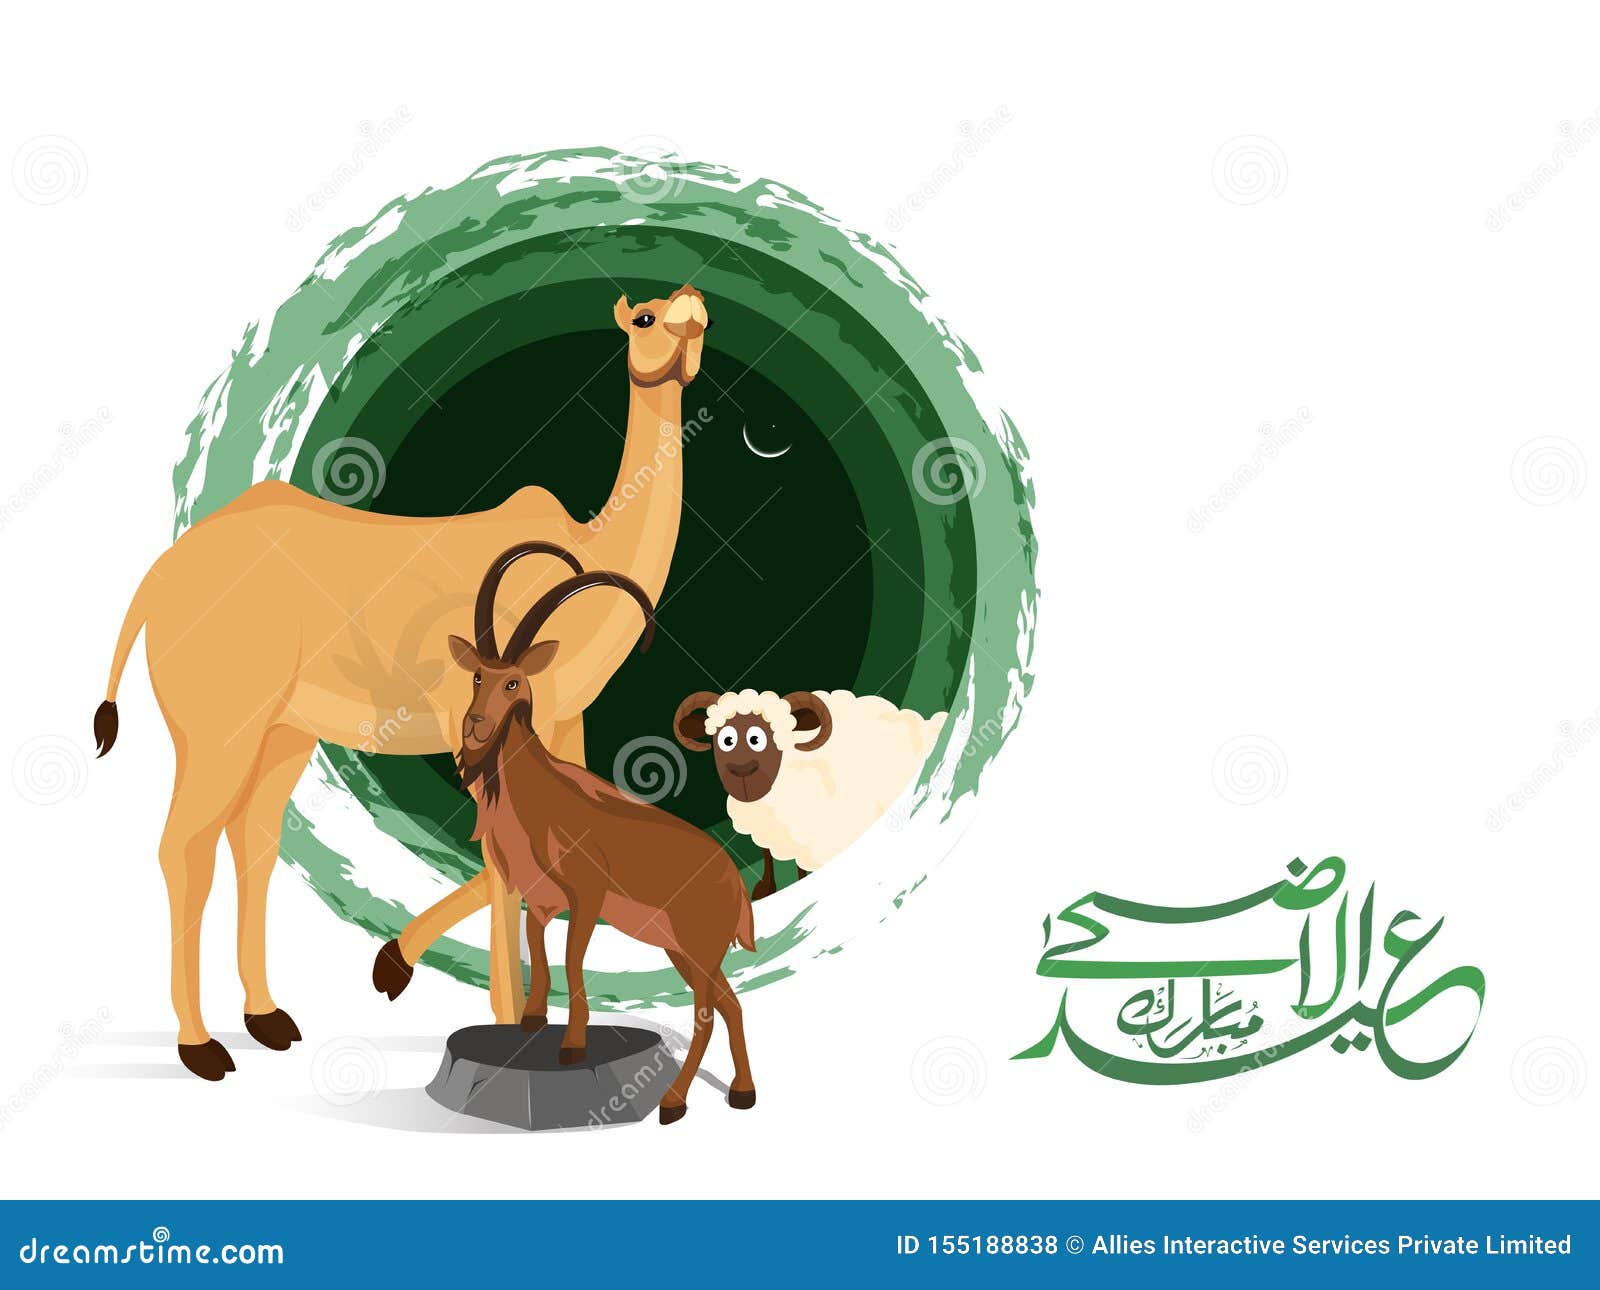 Eid-Ul-Adha Festival Celebration Poster or Banner Design with Animal  Character of Camel, Goat and Sheep. Stock Illustration - Illustration of  banner, card: 155188838